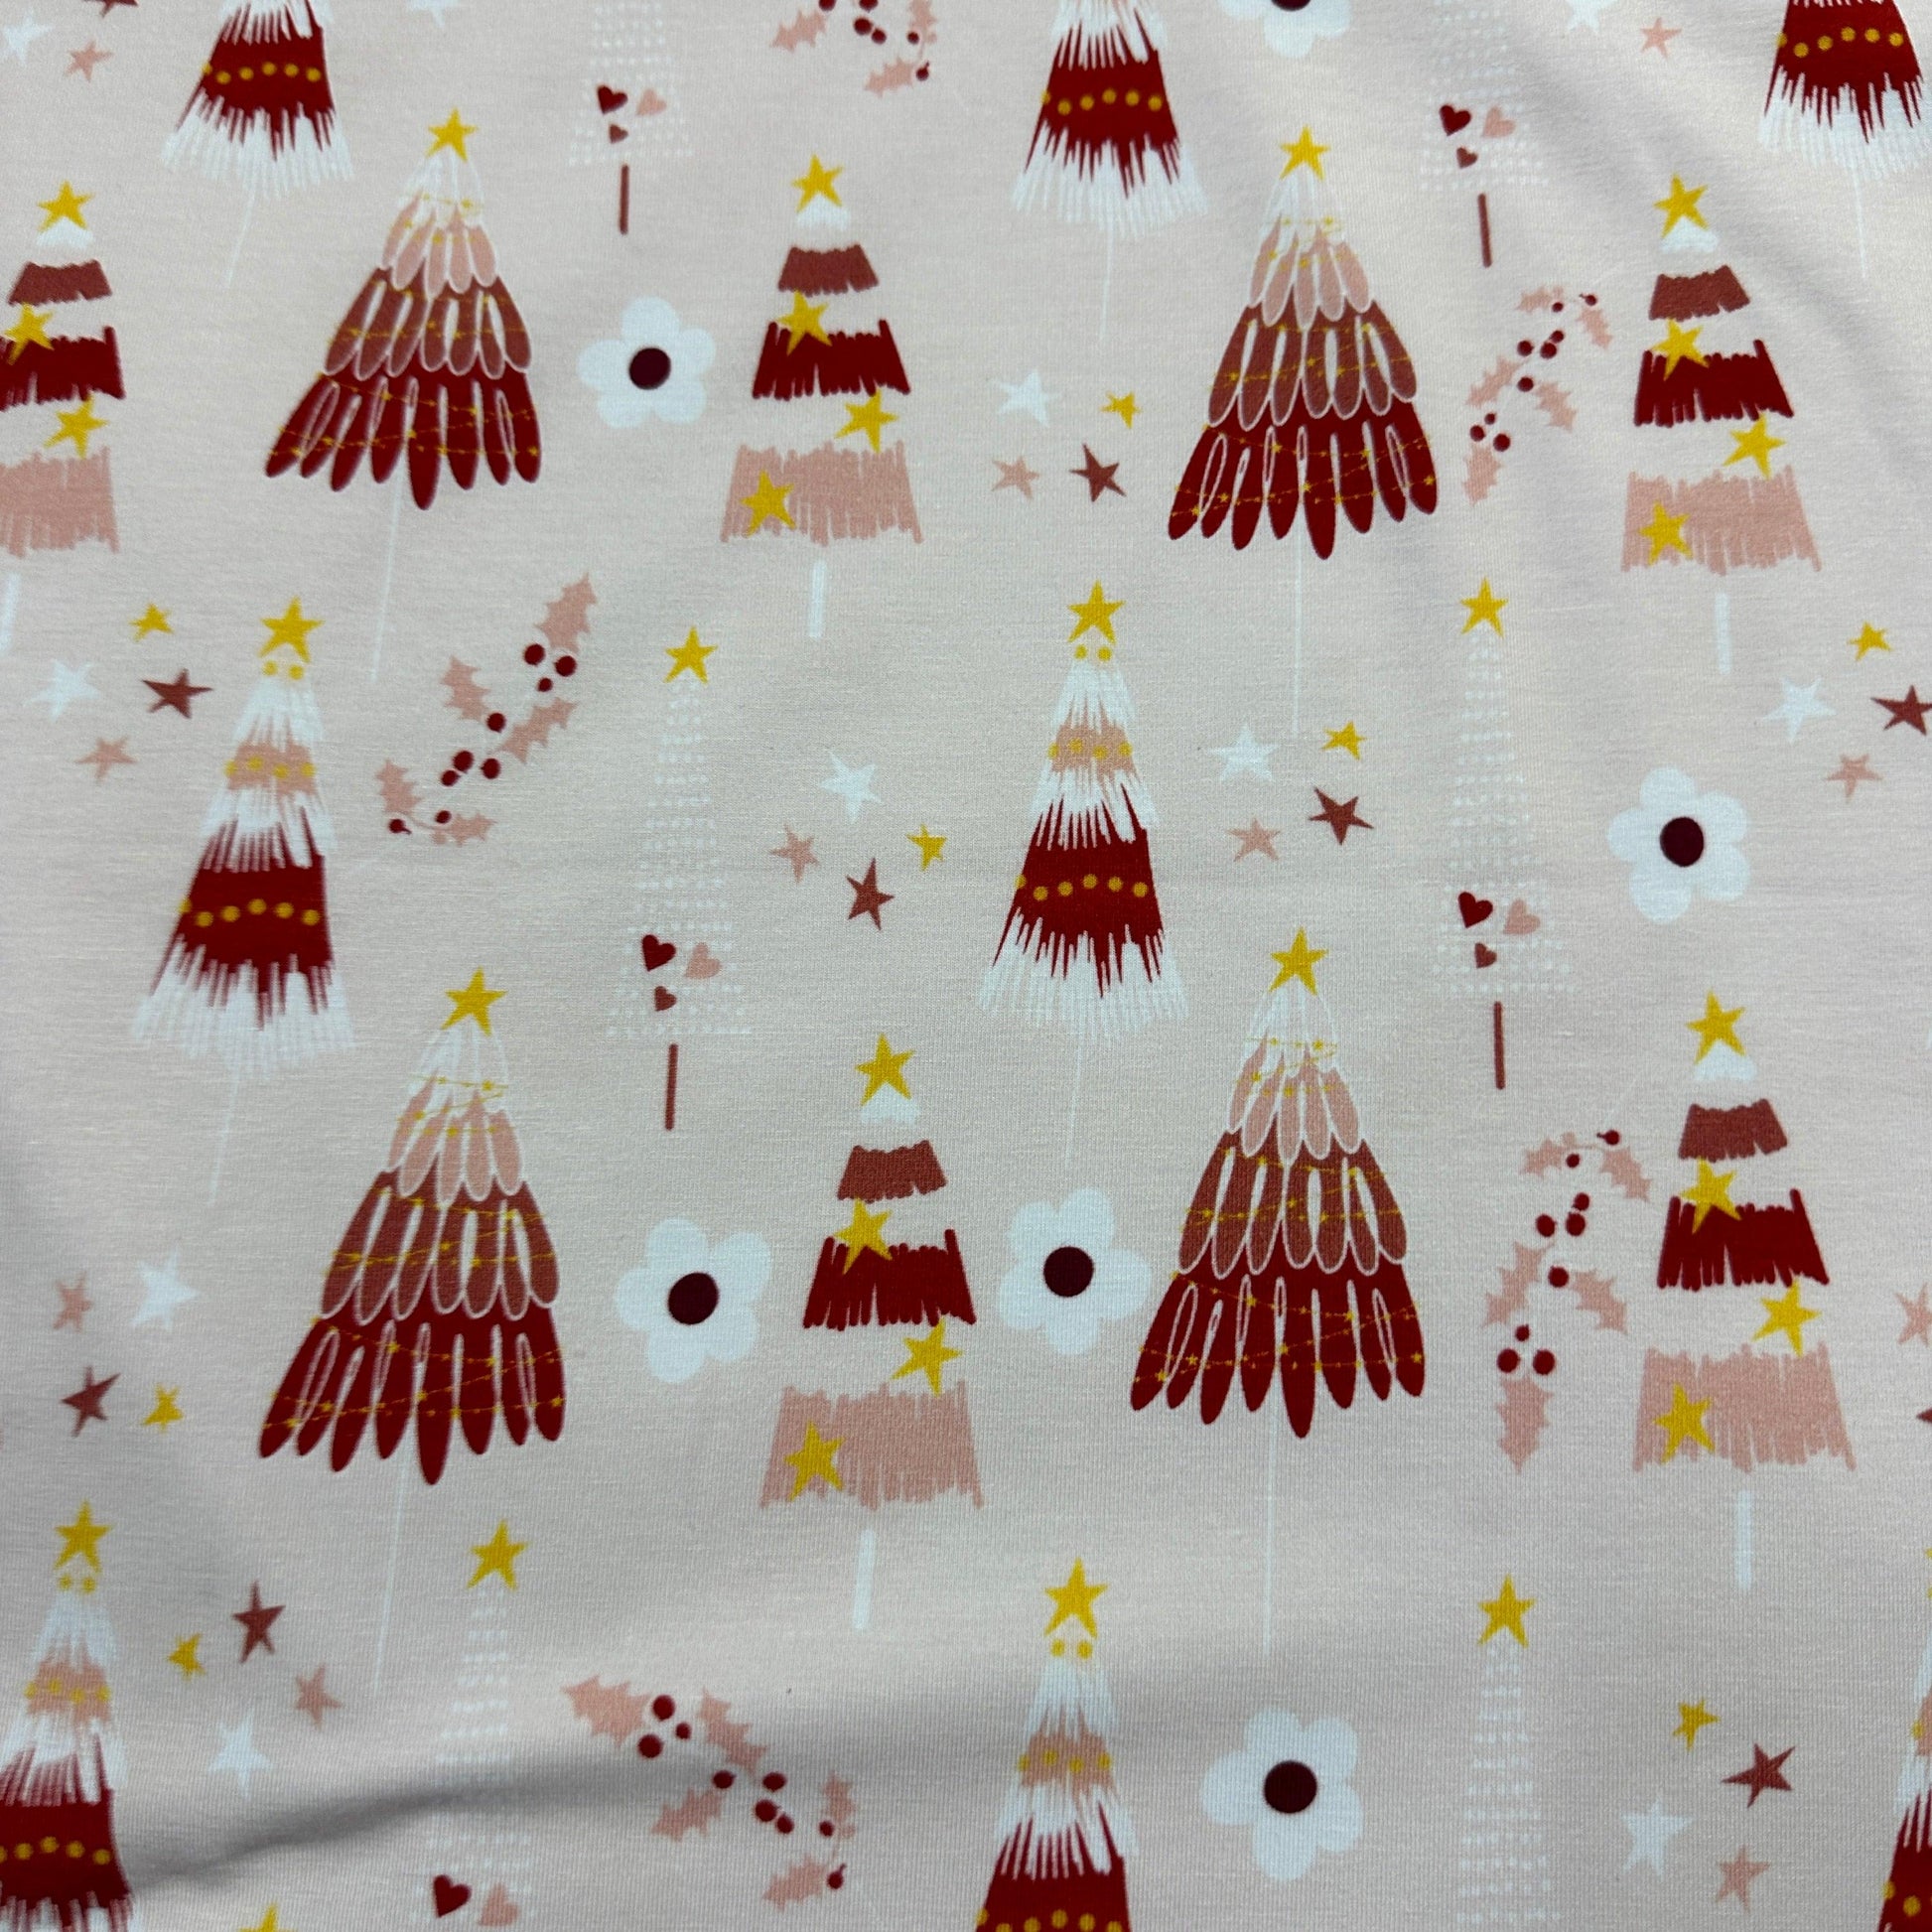 Doodle Trees on Pink Bamboo/Spandex Jersey Fabric - Nature's Fabrics